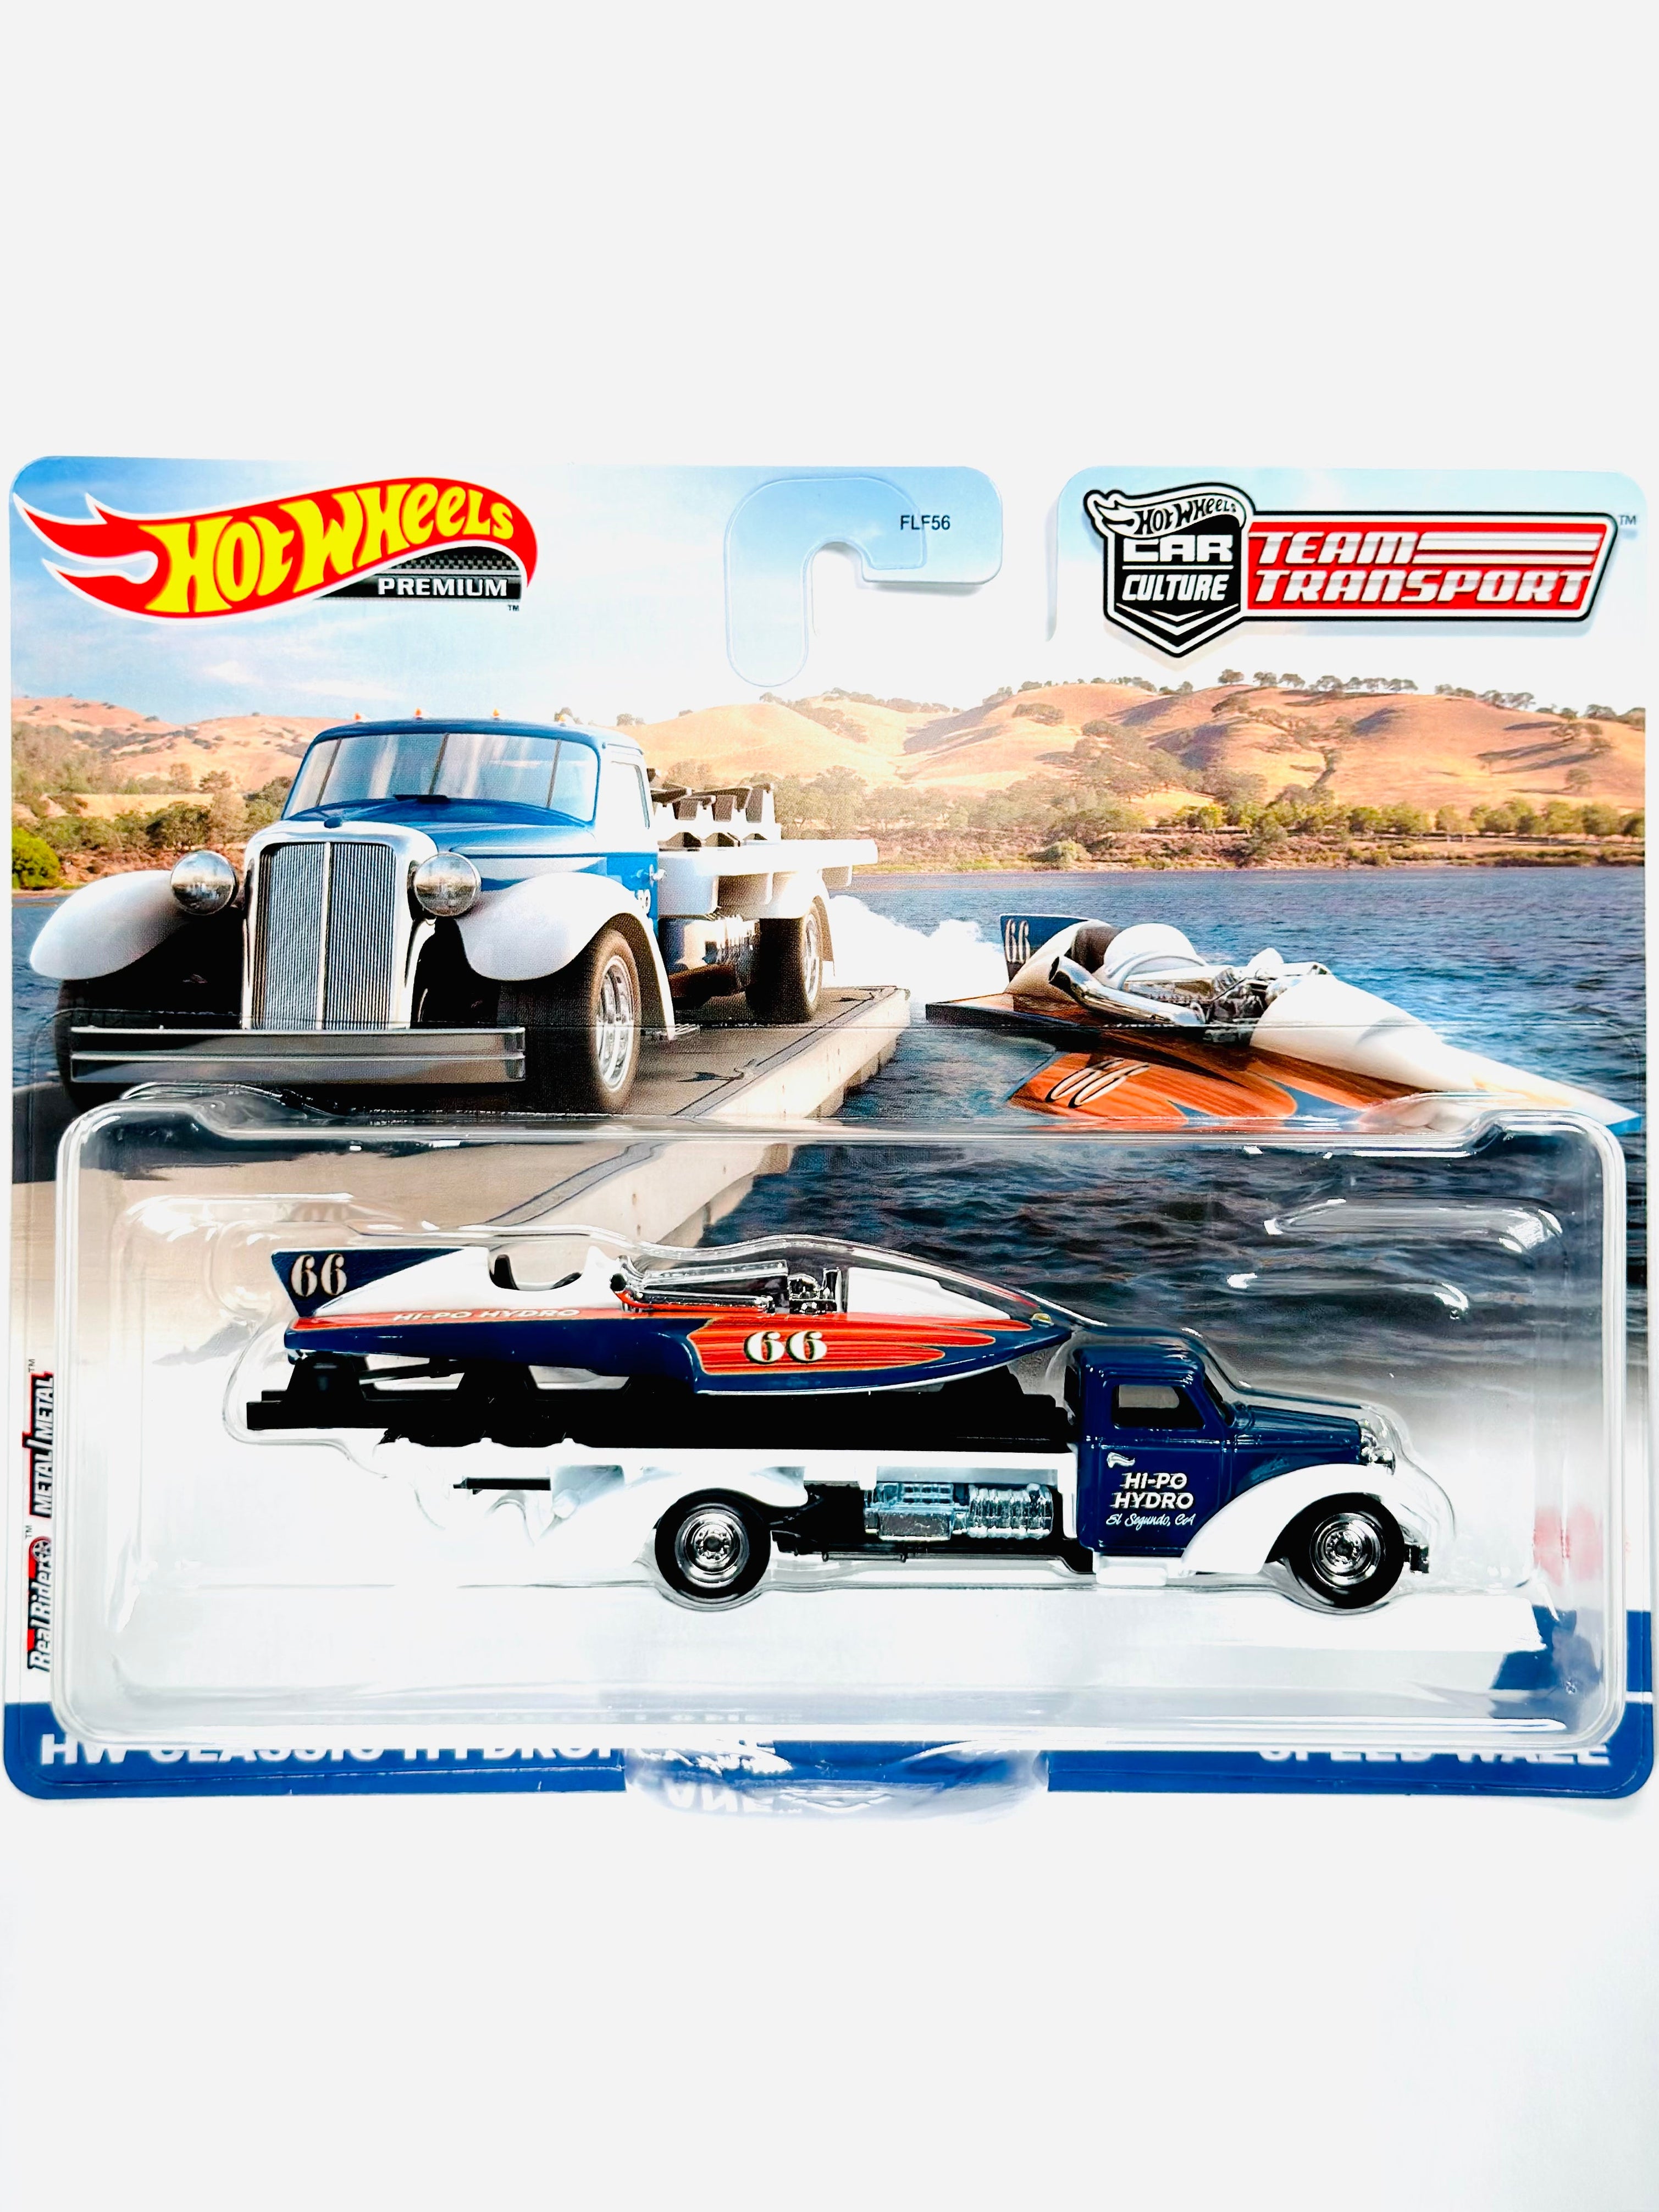 Hot Wheels 2022 Team Transport Case S Hw Classic Hydroplane And Speed Wa Jcardiecast 5239